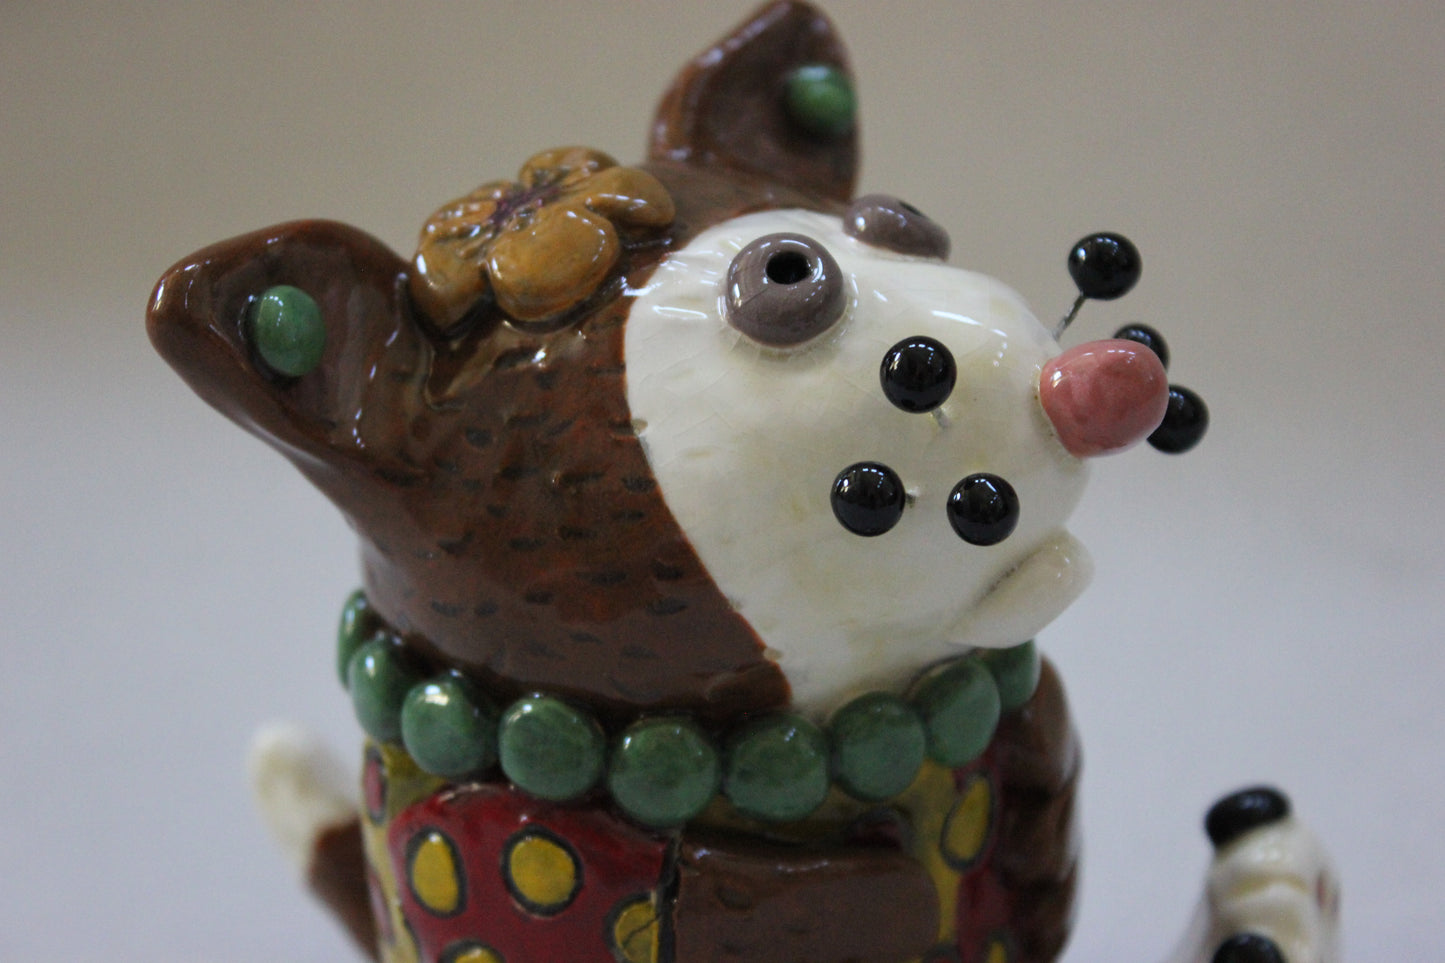 Whimsical, Clothed Kitty Cat Sculpture